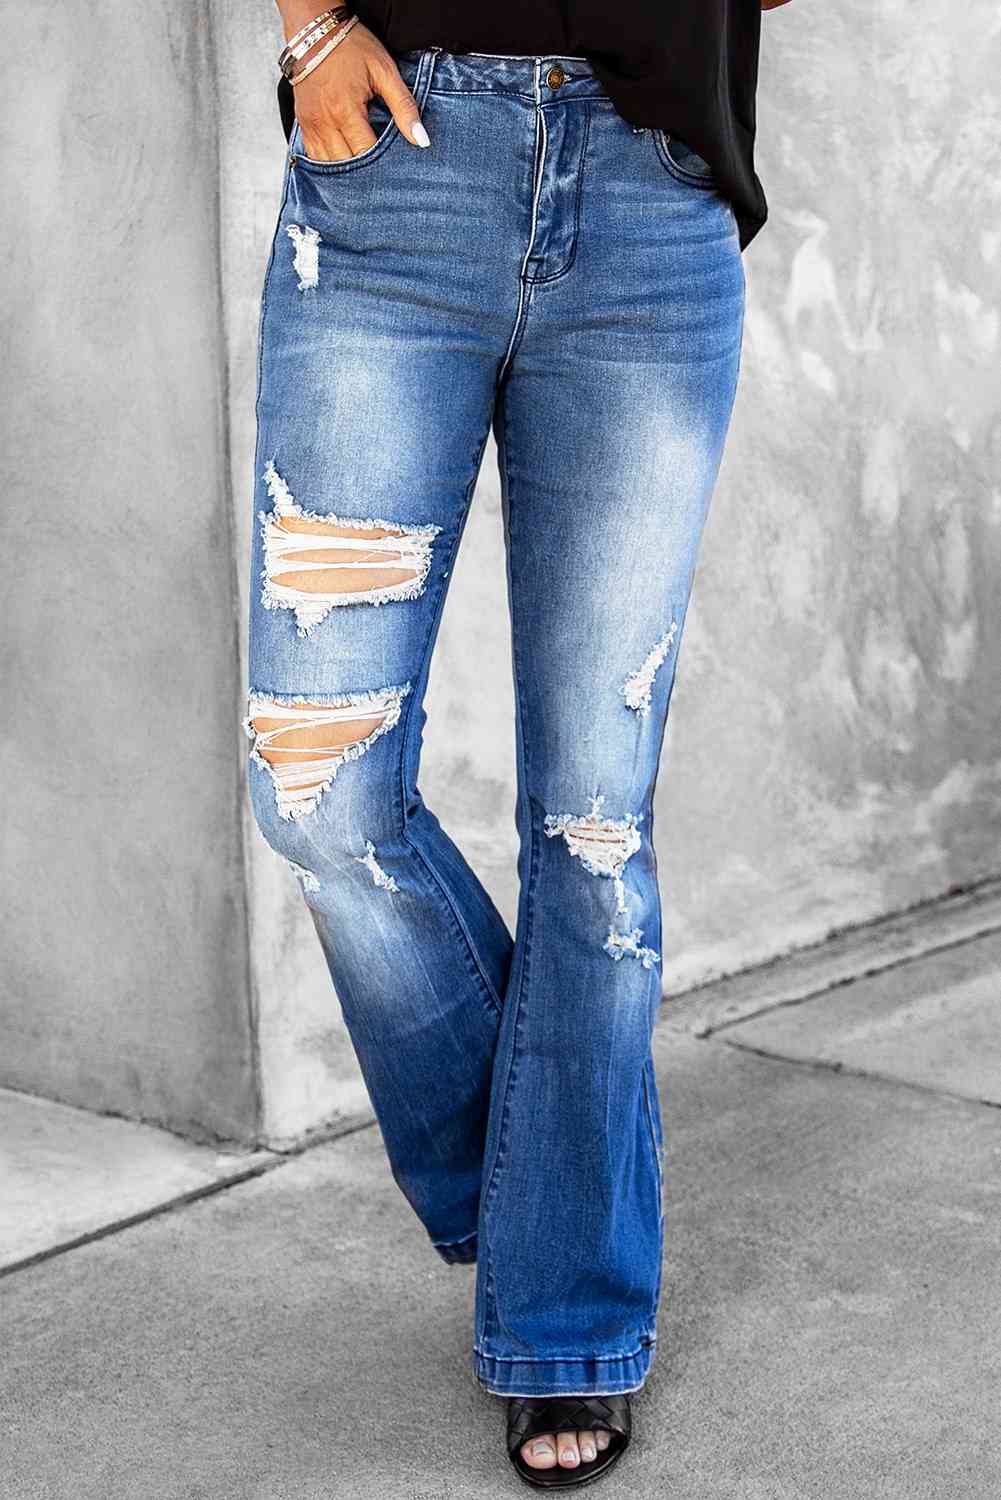 Baeful Distressed Flare Leg Jeans with Pockets